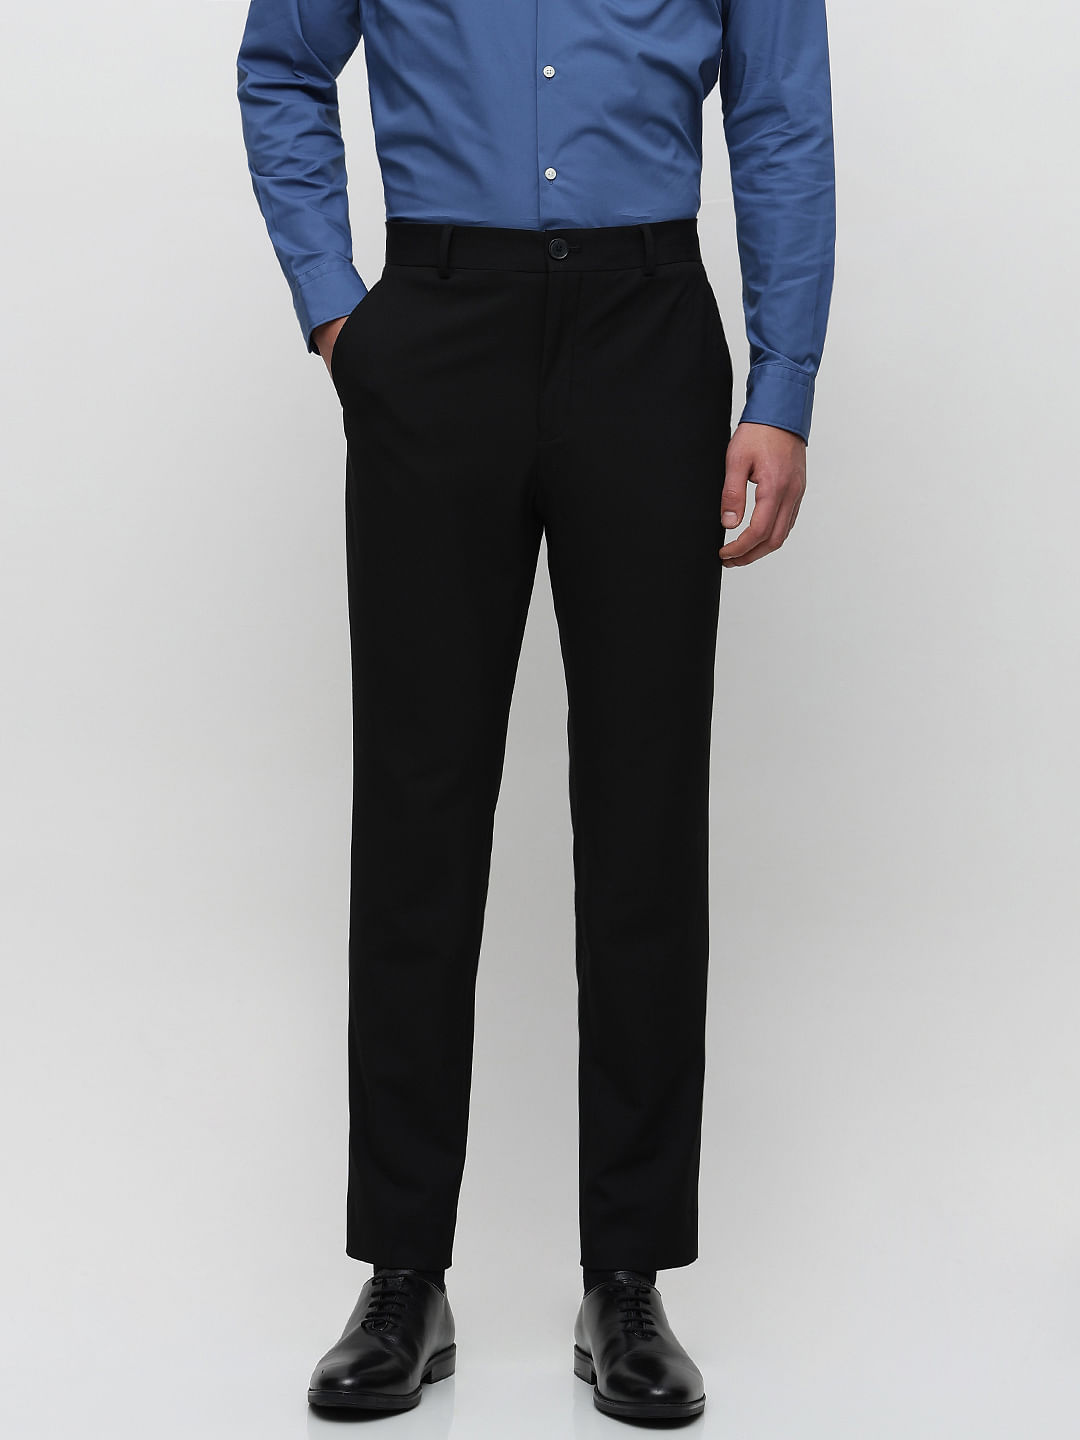 Tall Men's Black Suit Trousers | American Tall